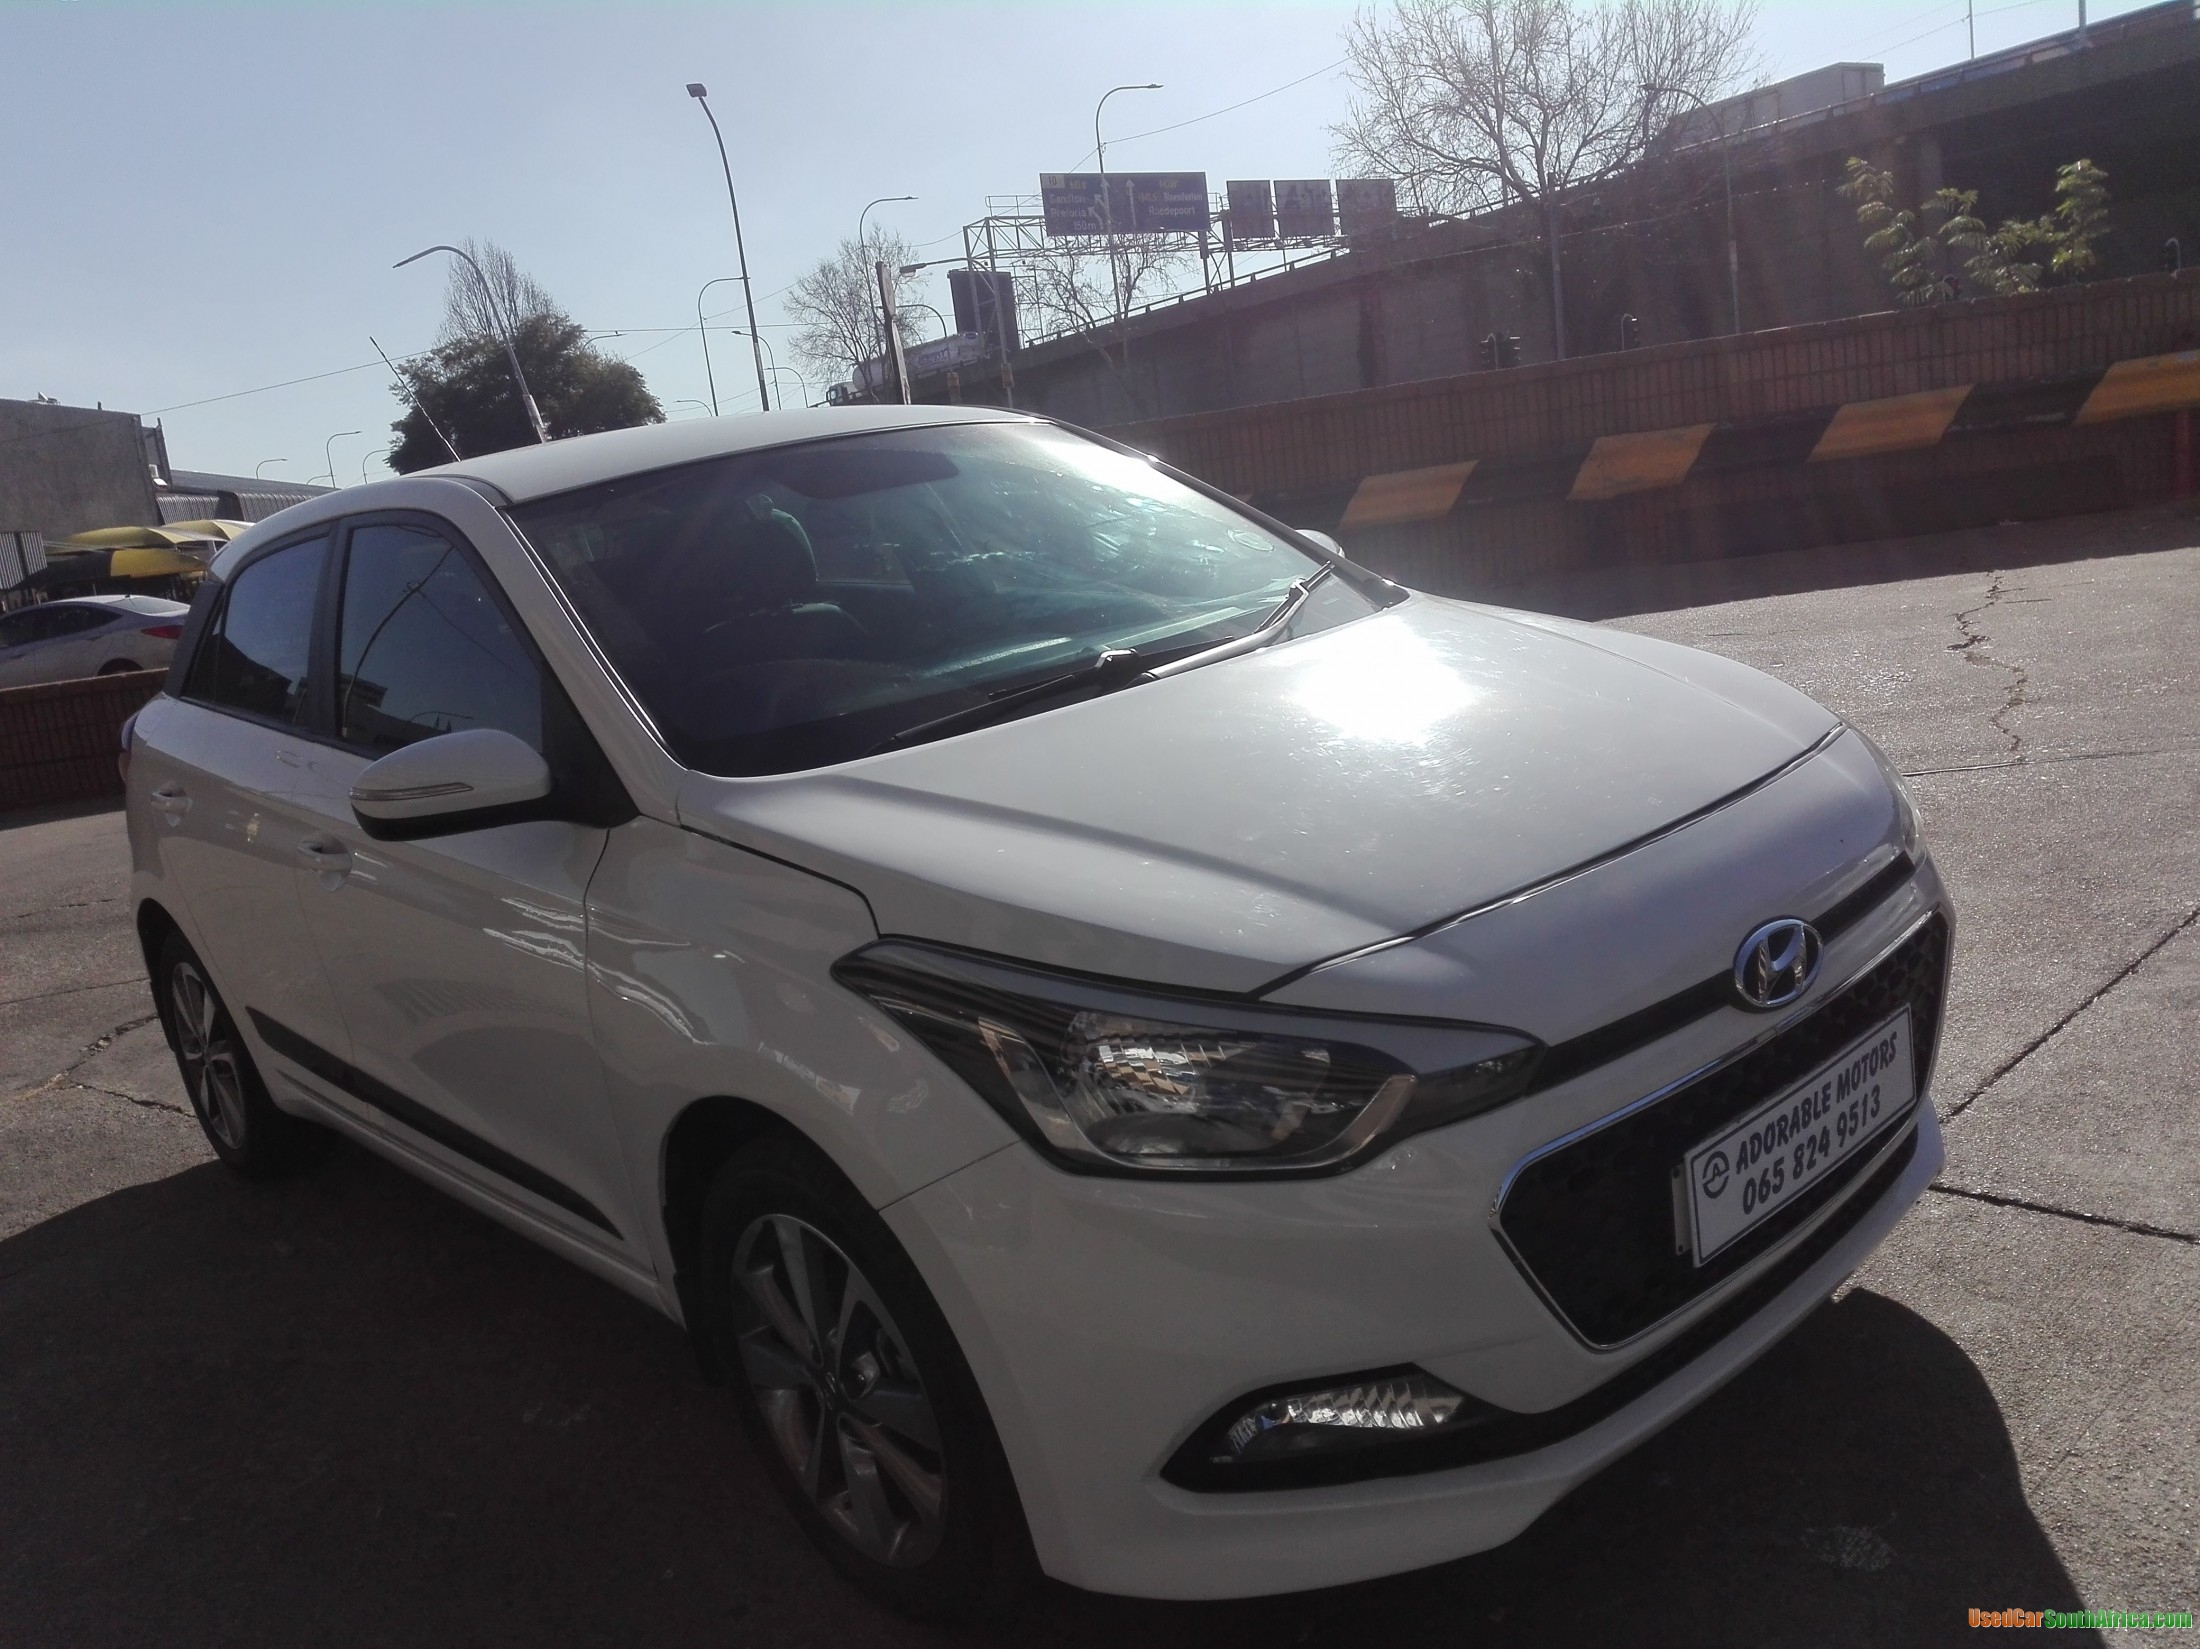 2015 Hyundai I20 1.4 used car for sale in Johannesburg City Gauteng South Africa - OnlyCars.co.za